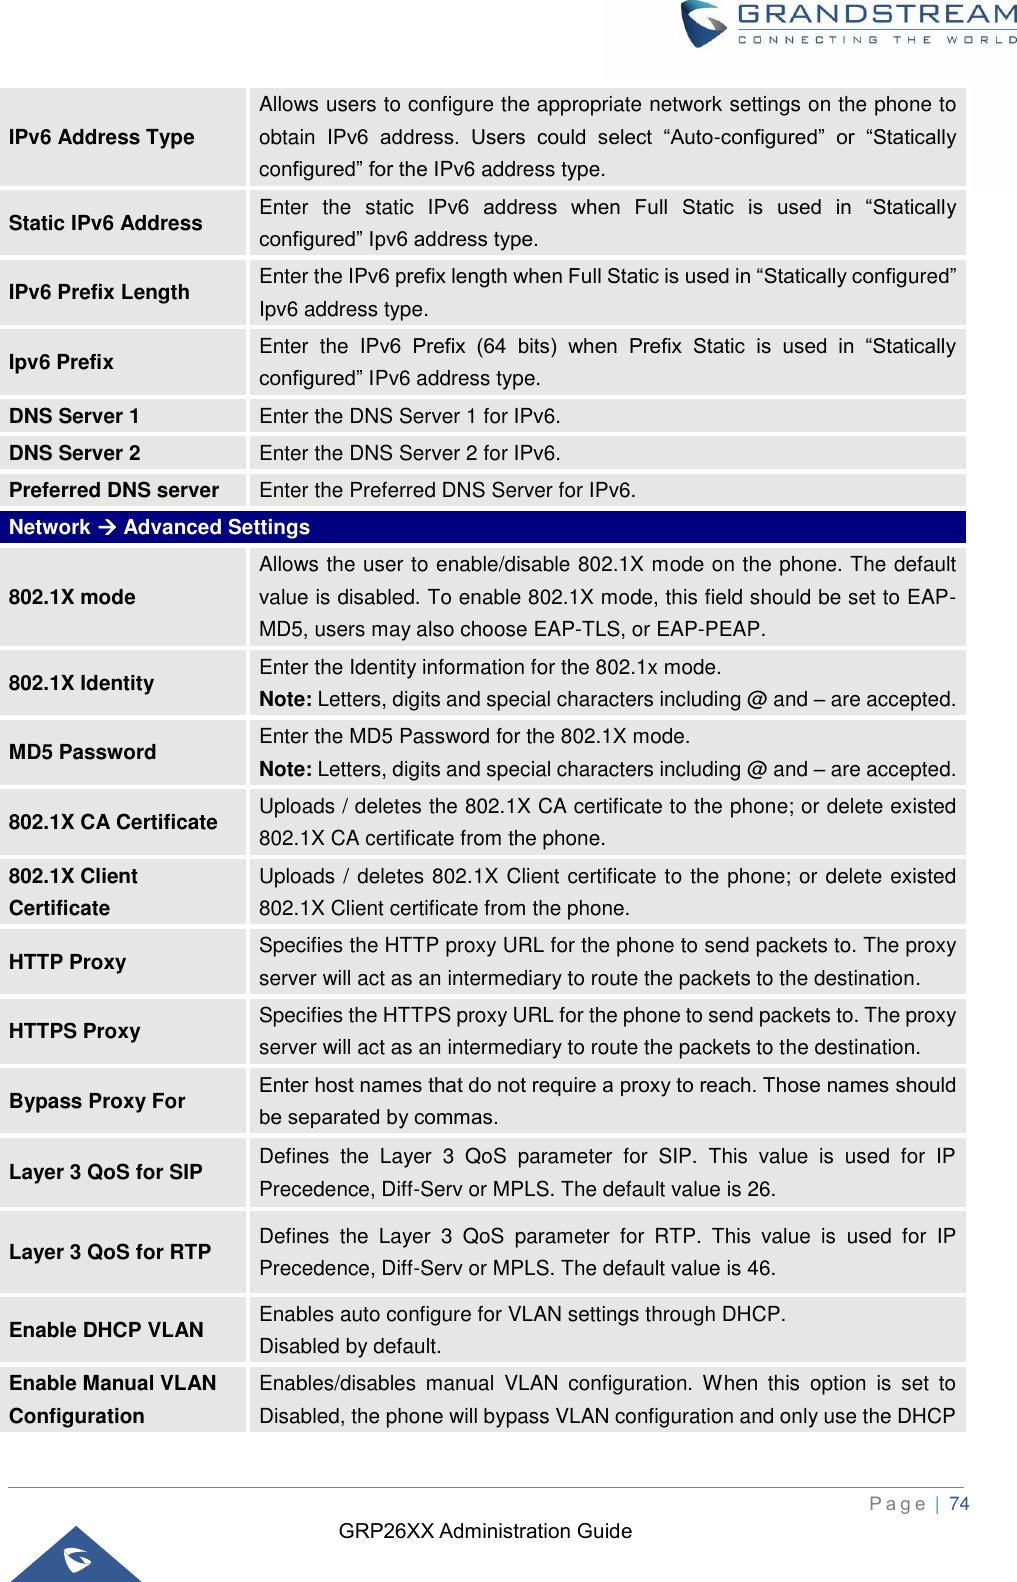 GRP26XX Administration Guide          P a g e  | 74   IPv6 Address Type Allows users to configure the appropriate network settings on the phone to obtain  IPv6  address.  Users  could  select  “Auto-configured”  or  “Statically configured” for the IPv6 address type. Static IPv6 Address Enter  the  static  IPv6  address  when  Full  Static  is  used  in  “Statically configured” Ipv6 address type. IPv6 Prefix Length Enter the IPv6 prefix length when Full Static is used in “Statically configured” Ipv6 address type. Ipv6 Prefix Enter  the  IPv6  Prefix  (64  bits)  when  Prefix  Static  is  used  in  “Statically configured” IPv6 address type. DNS Server 1 Enter the DNS Server 1 for IPv6. DNS Server 2 Enter the DNS Server 2 for IPv6. Preferred DNS server Enter the Preferred DNS Server for IPv6. Network → Advanced Settings 802.1X mode Allows the user to enable/disable 802.1X mode on the phone. The default value is disabled. To enable 802.1X mode, this field should be set to EAP-MD5, users may also choose EAP-TLS, or EAP-PEAP. 802.1X Identity Enter the Identity information for the 802.1x mode. Note: Letters, digits and special characters including @ and – are accepted. MD5 Password Enter the MD5 Password for the 802.1X mode. Note: Letters, digits and special characters including @ and – are accepted. 802.1X CA Certificate Uploads / deletes the 802.1X CA certificate to the phone; or delete existed 802.1X CA certificate from the phone. 802.1X Client Certificate Uploads / deletes 802.1X Client certificate to the phone; or delete existed 802.1X Client certificate from the phone. HTTP Proxy Specifies the HTTP proxy URL for the phone to send packets to. The proxy server will act as an intermediary to route the packets to the destination. HTTPS Proxy Specifies the HTTPS proxy URL for the phone to send packets to. The proxy server will act as an intermediary to route the packets to the destination. Bypass Proxy For Enter host names that do not require a proxy to reach. Those names should be separated by commas. Layer 3 QoS for SIP Defines  the  Layer  3  QoS  parameter  for  SIP.  This  value  is  used  for  IP Precedence, Diff-Serv or MPLS. The default value is 26. Layer 3 QoS for RTP Defines  the  Layer  3  QoS  parameter  for  RTP.  This  value  is  used  for  IP Precedence, Diff-Serv or MPLS. The default value is 46. Enable DHCP VLAN Enables auto configure for VLAN settings through DHCP.   Disabled by default. Enable Manual VLAN Configuration Enables/disables  manual  VLAN  configuration.  When  this  option  is  set  to Disabled, the phone will bypass VLAN configuration and only use the DHCP 